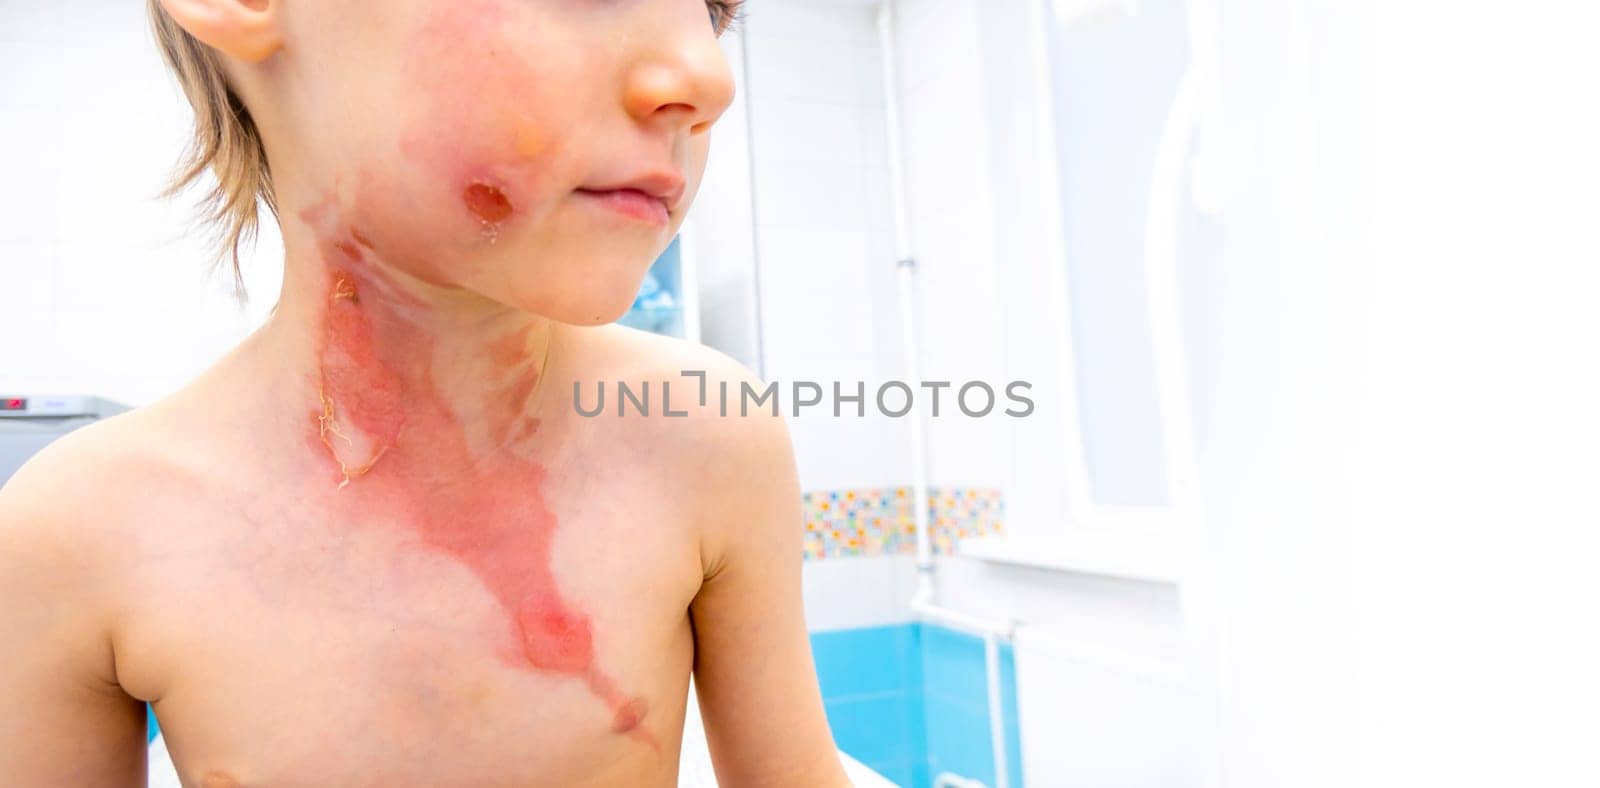 dressing a boy with a burn from boiling water by kajasja